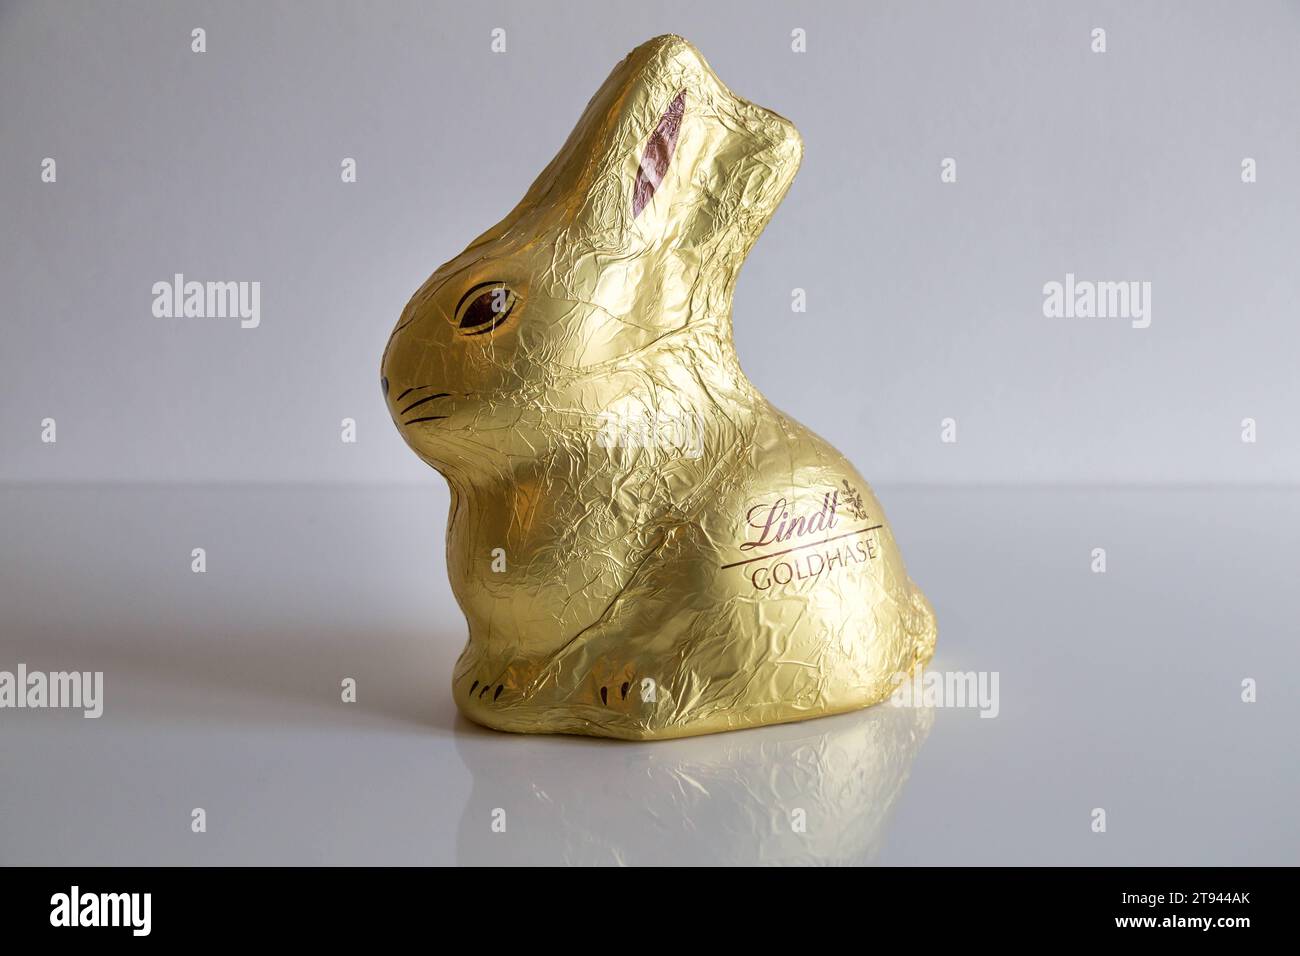 Osterschokohase von Lindt *** Easter chocolate bunny from Lindt Credit: Imago/Alamy Live News Stock Photo